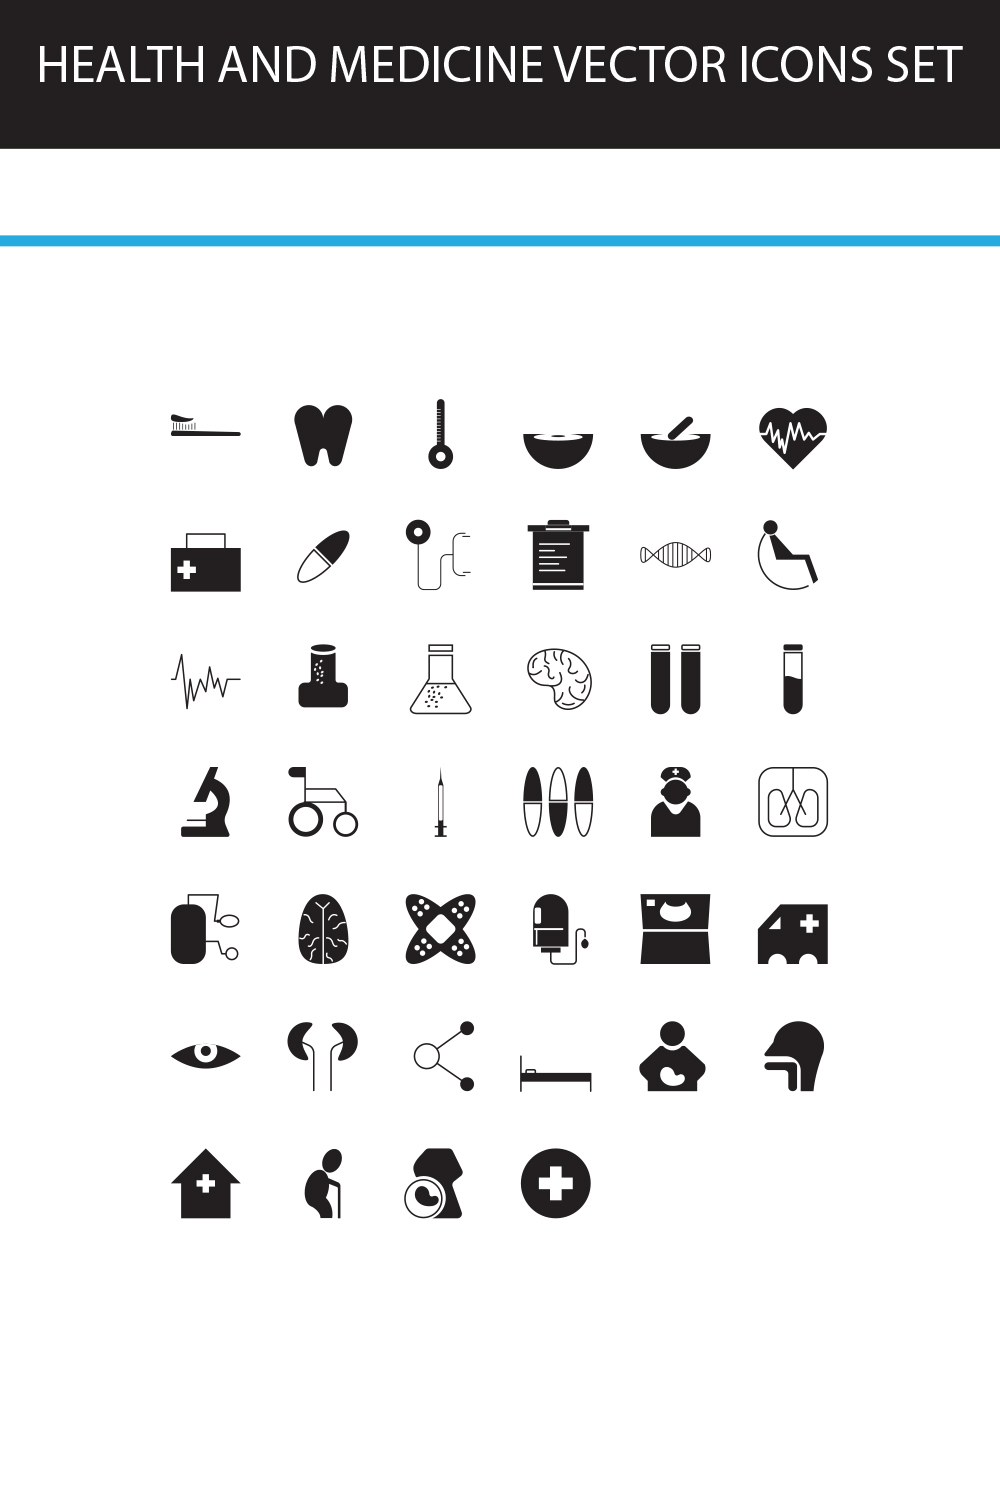 Health and medicine vector icons set pinterest preview image.